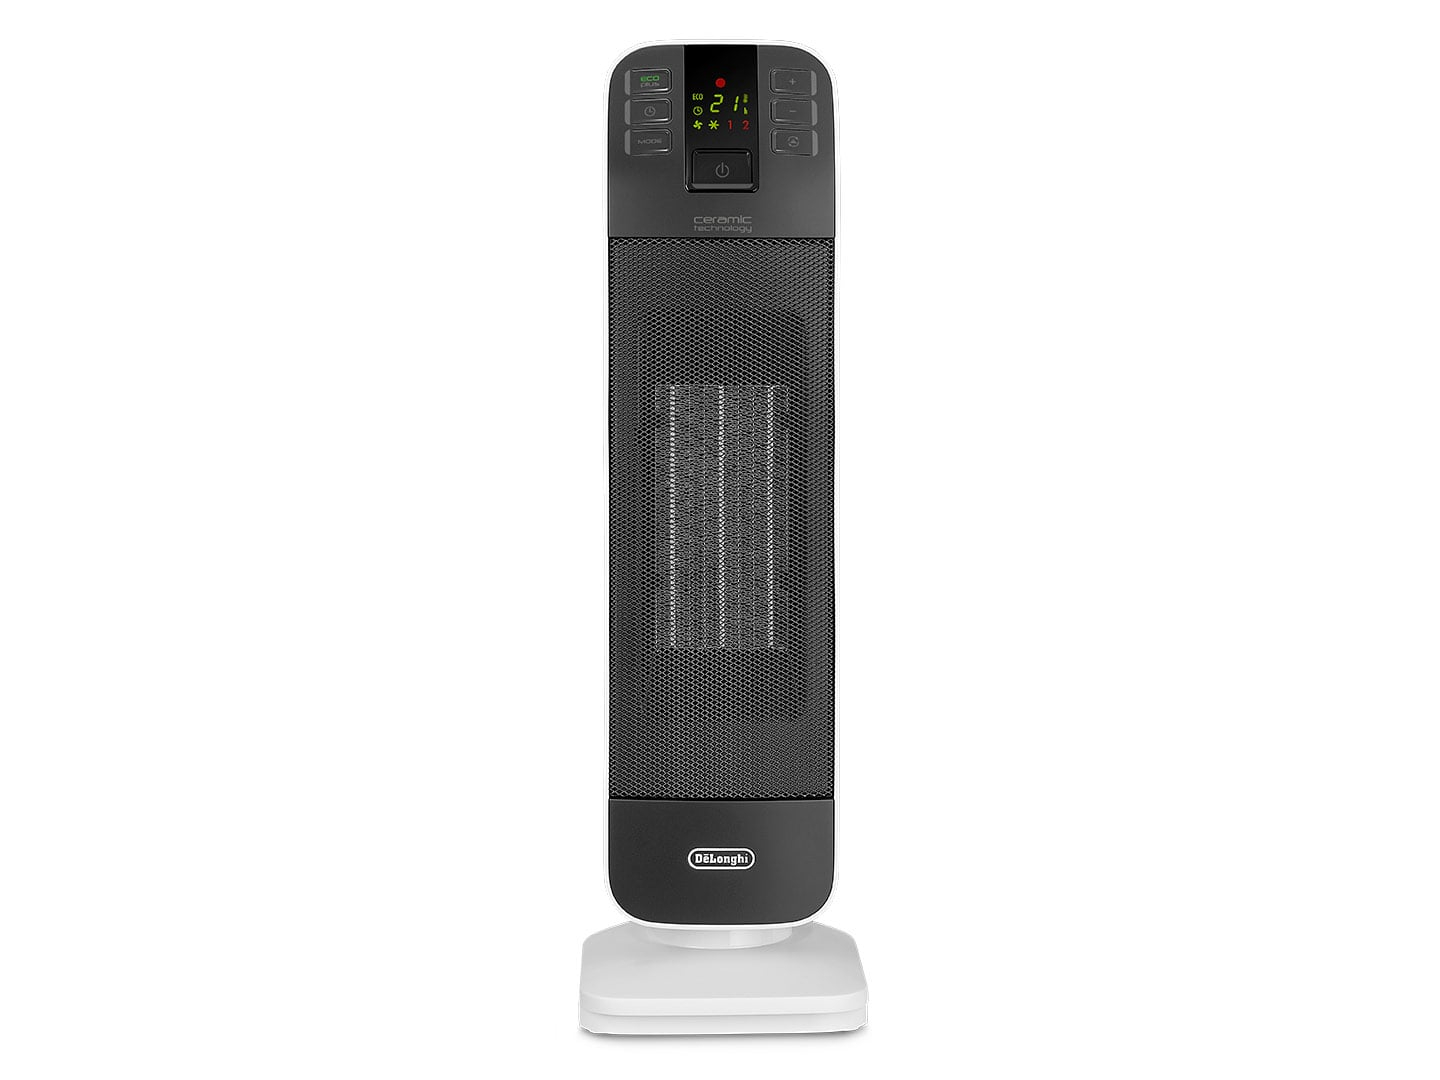 Hfx65v20 Ceramic Fan Heater Portable Heating Delonghi throughout sizing 1440 X 1080